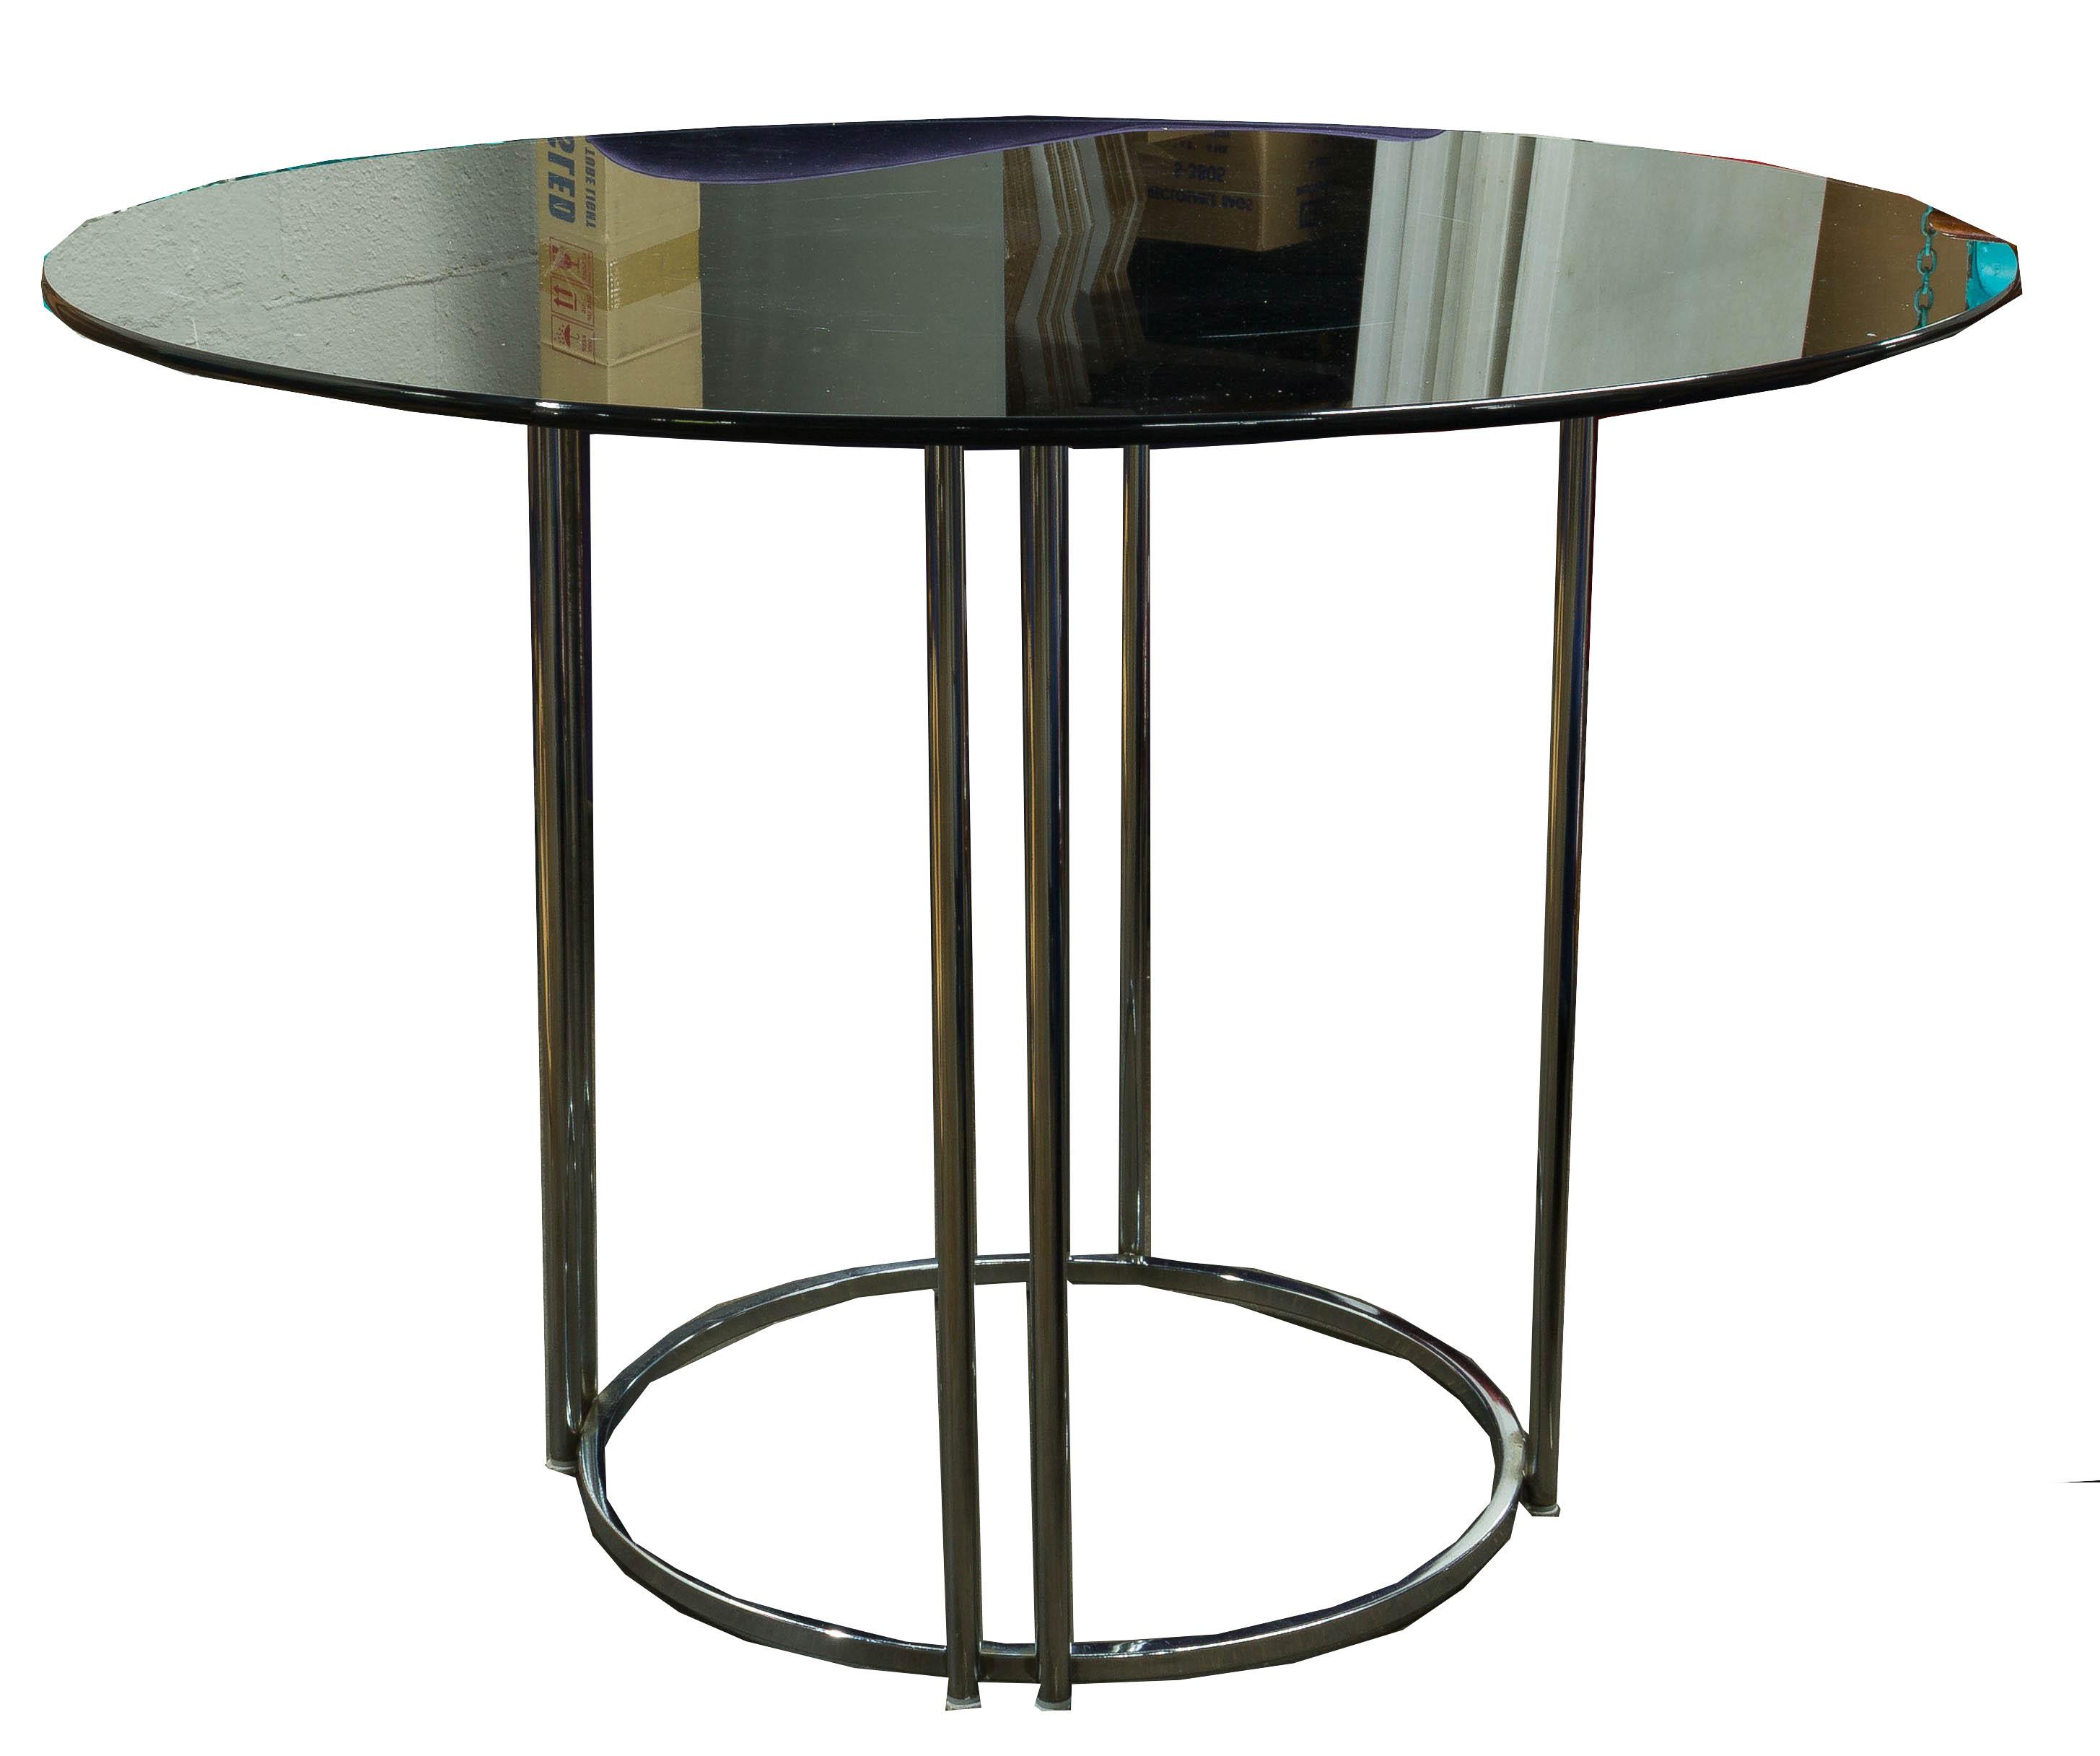 MCM Chrome Table and Chair Assortment